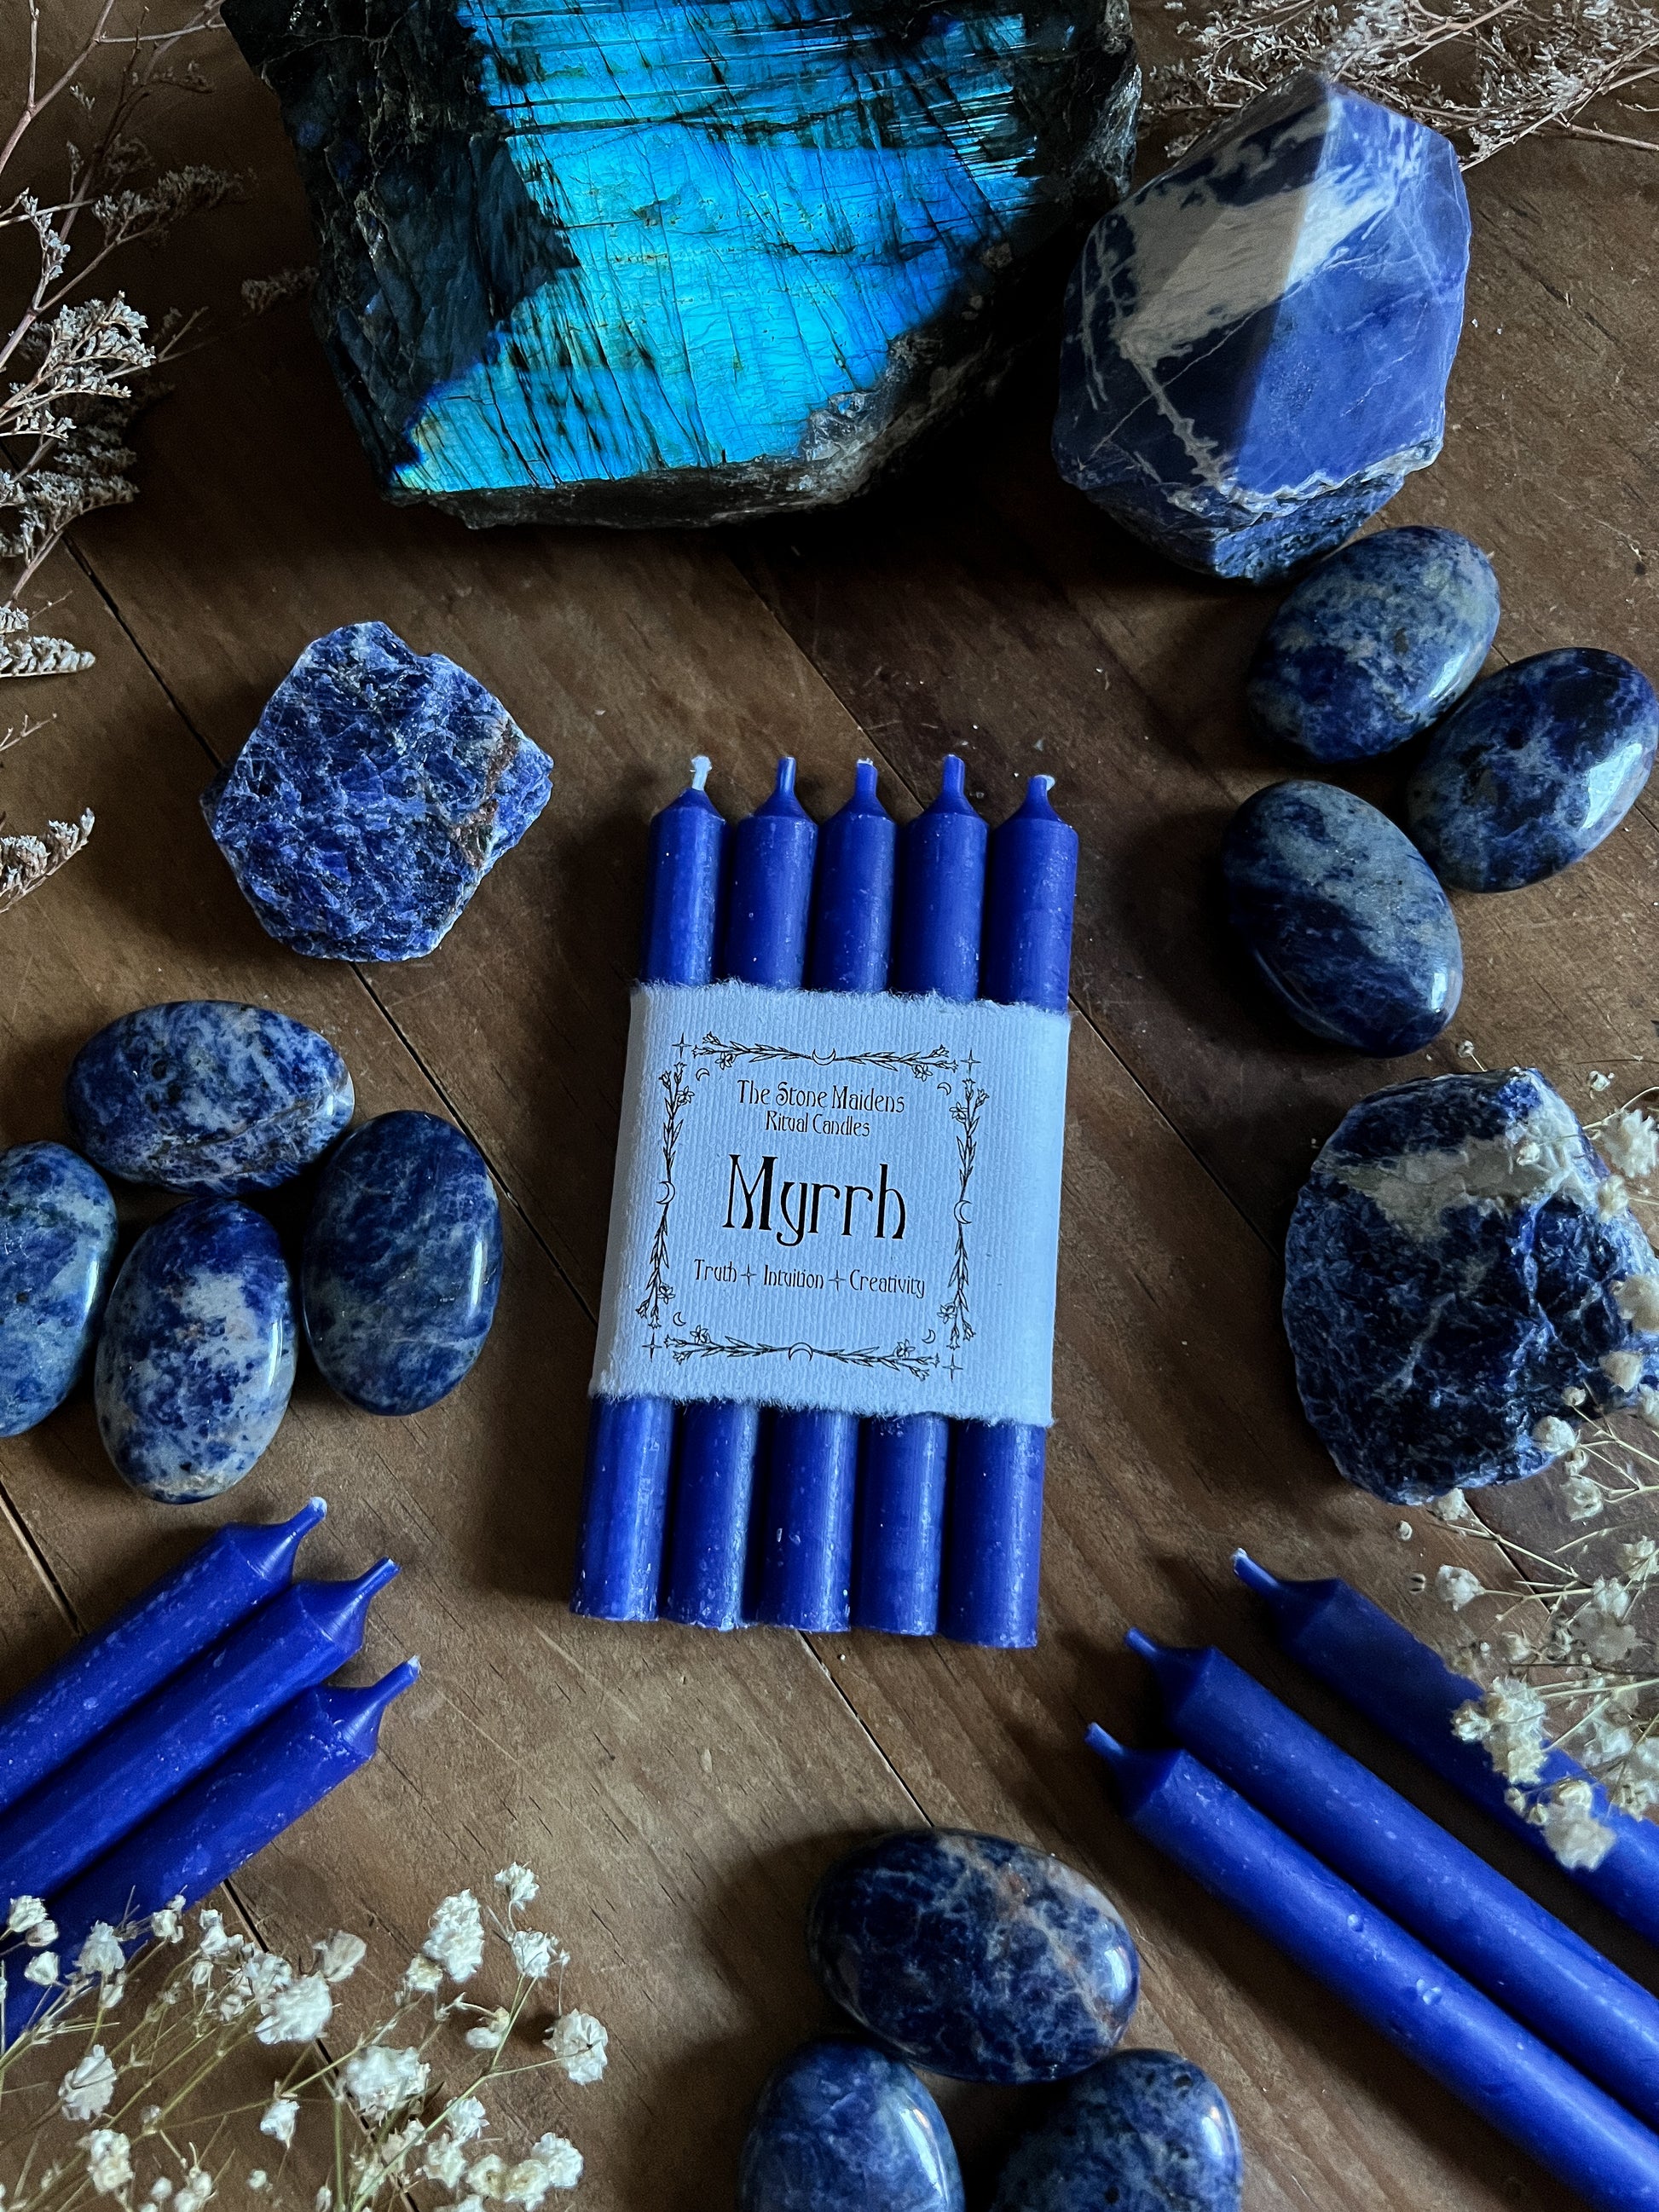 Blue Myrrh Chime candles arranged on a dark wooden altar surrounded by crystals, sold at The Stone Maidens